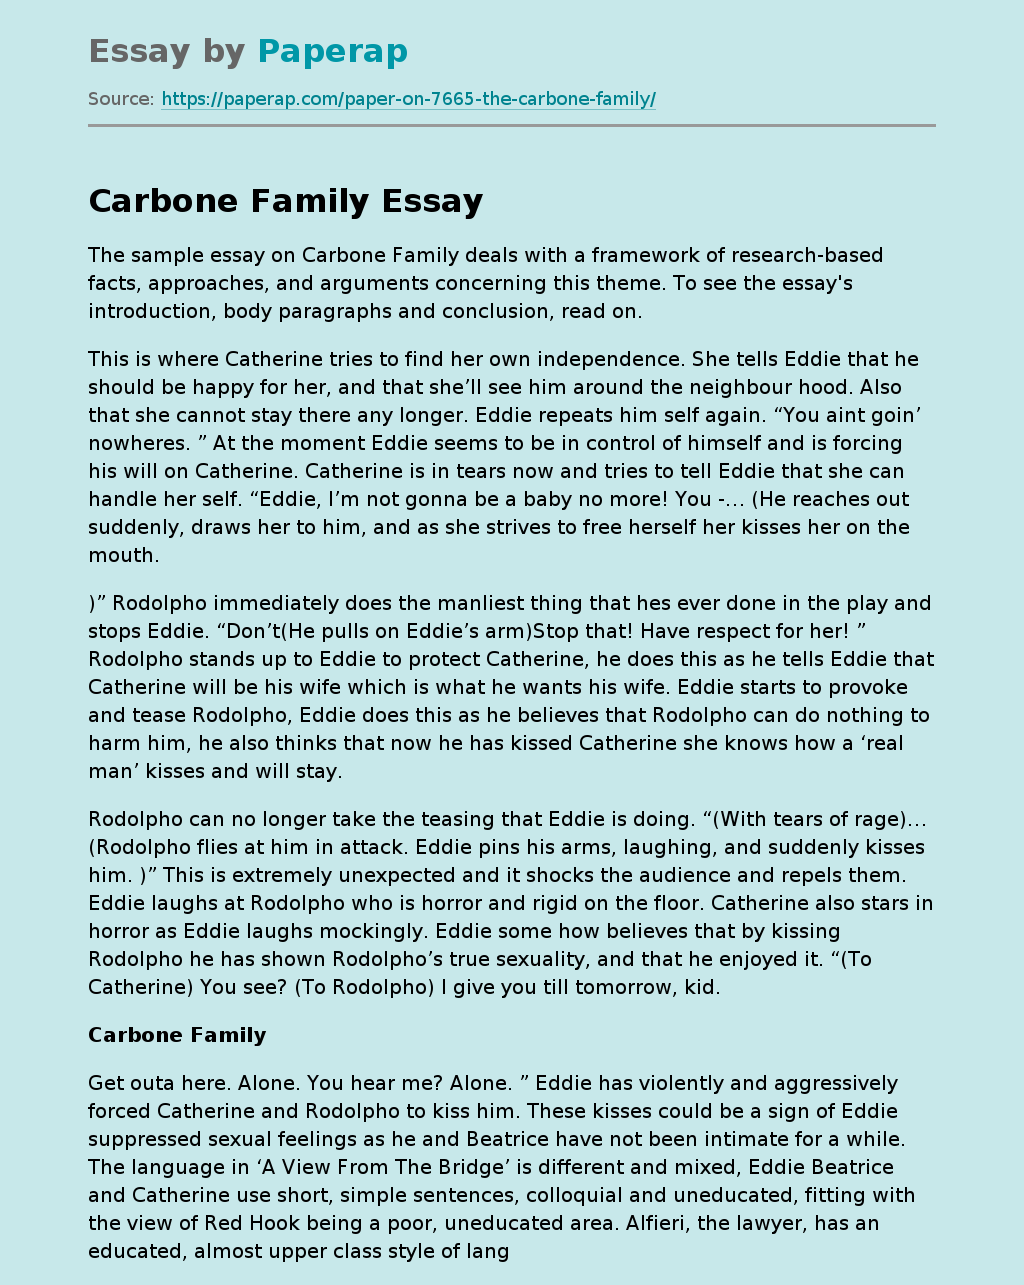 Essay on Carbone Family